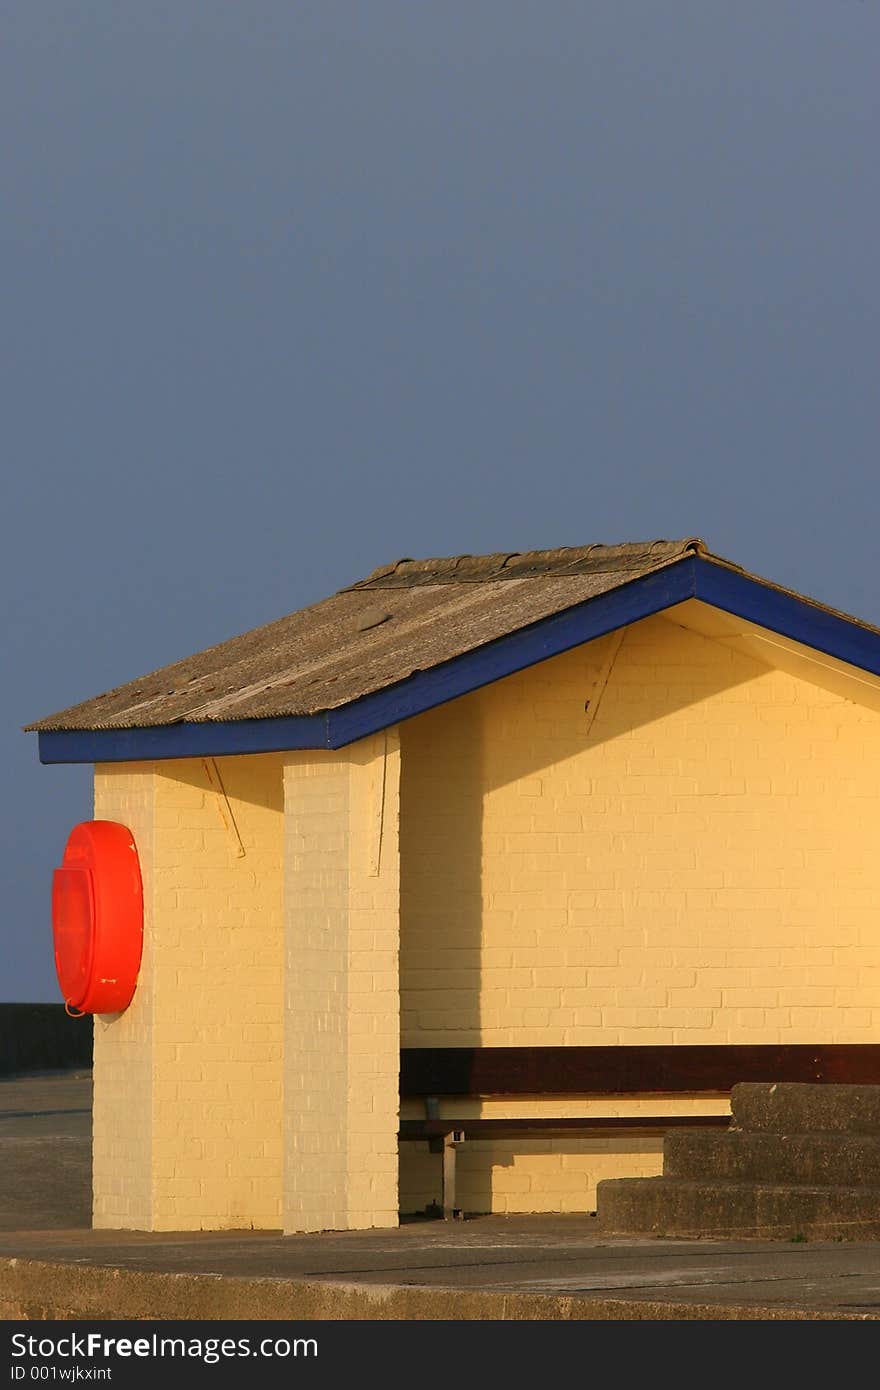 Brick shelter on a promenade, painted yellow and blue, with a bright orange, lifebuoy attached to the side. Brick shelter on a promenade, painted yellow and blue, with a bright orange, lifebuoy attached to the side.